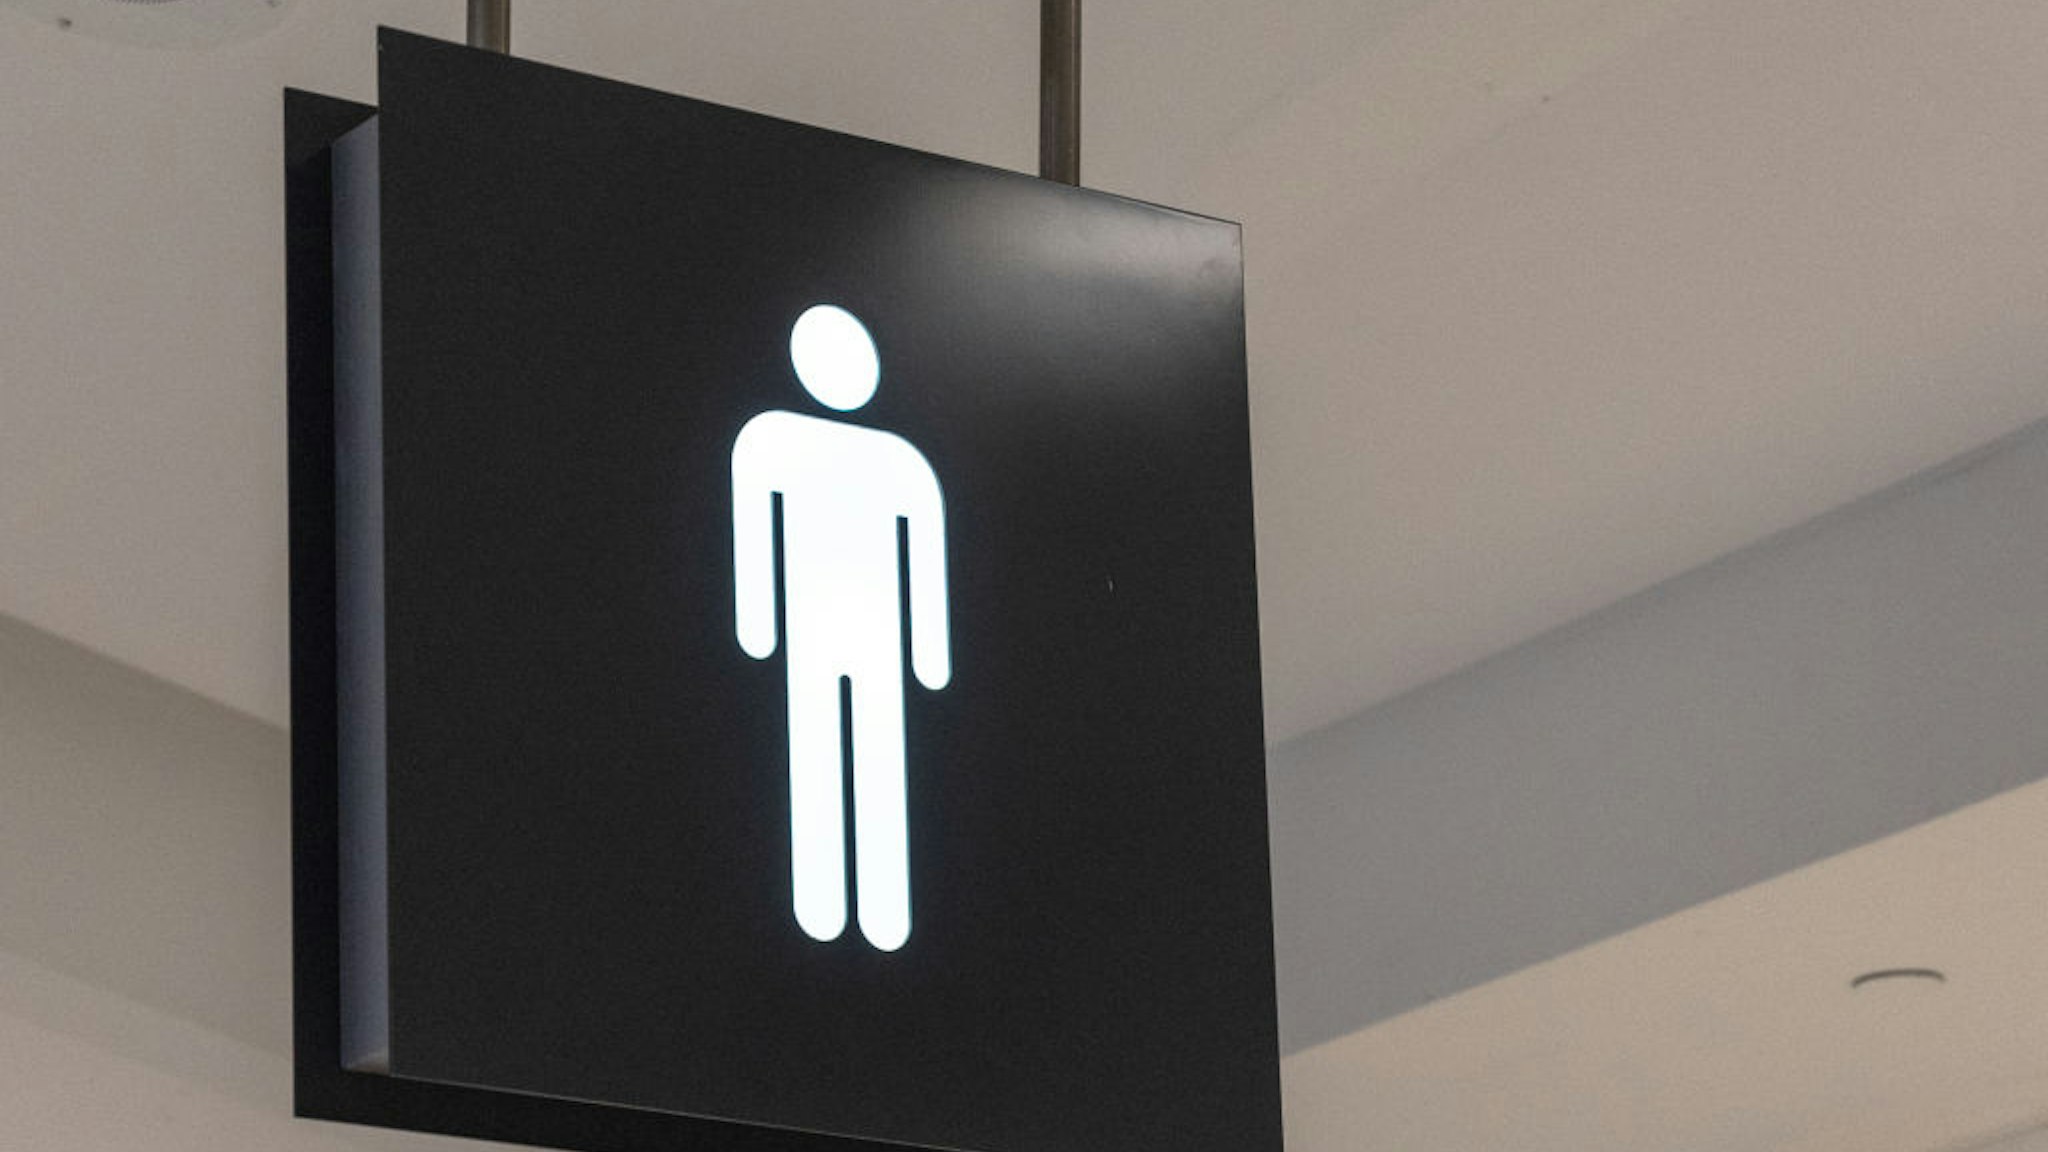 Public washroom or bathroom sign marking the facility is to be used by men.